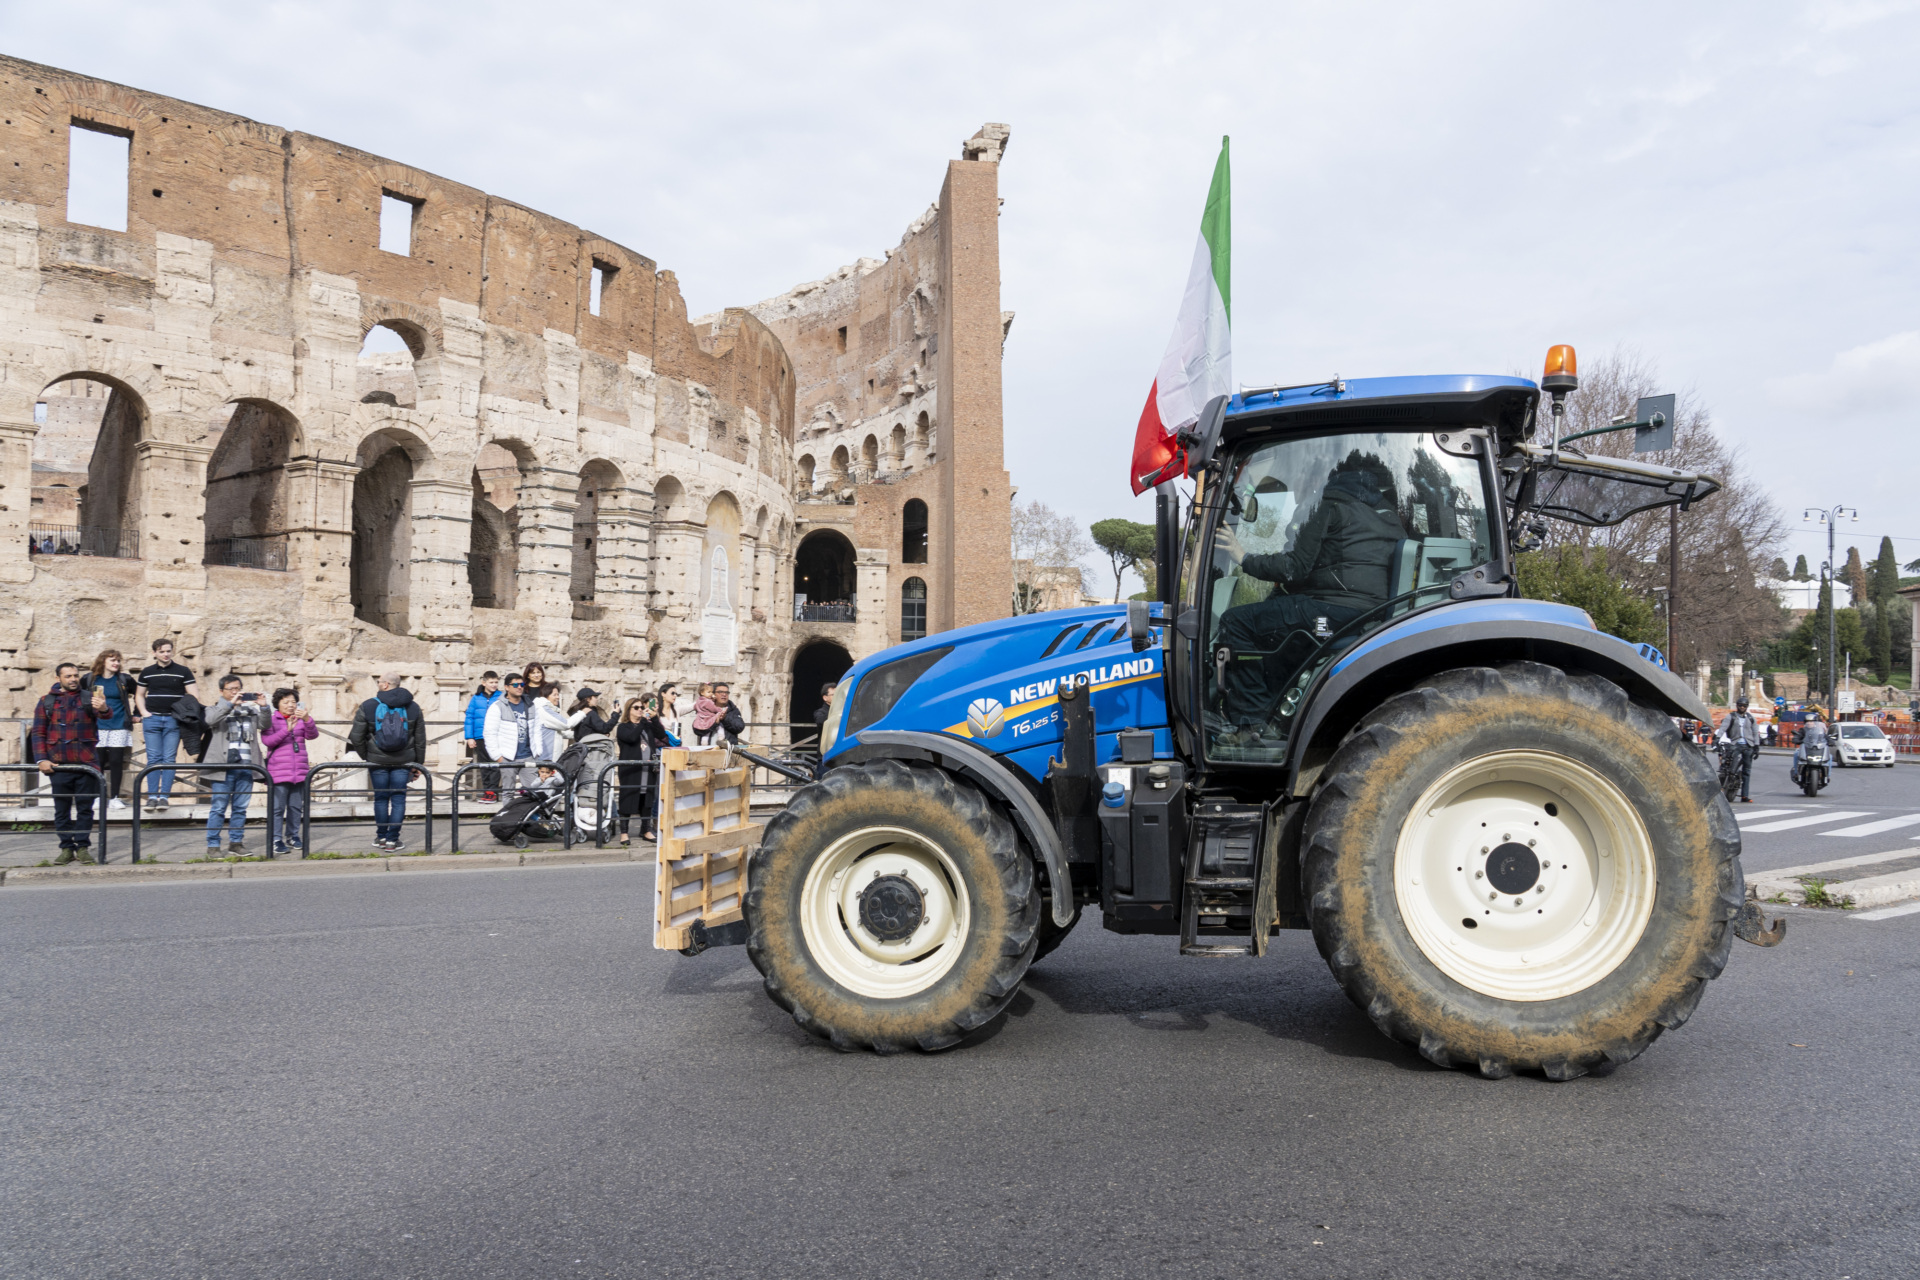 ROME, ITALY - 2024/02/09: Italian farmers drive their tractor on the street during the rally. Hundreds of tractors gathered outside Rome driven by farmers as part of a European wave of protests against the cutting of their produce by cheaper imports from third countries, rising fuel costs and the impact of government measures. (Photo by Stefano Costantino/SOPA Images/LightRocket via Getty Images)